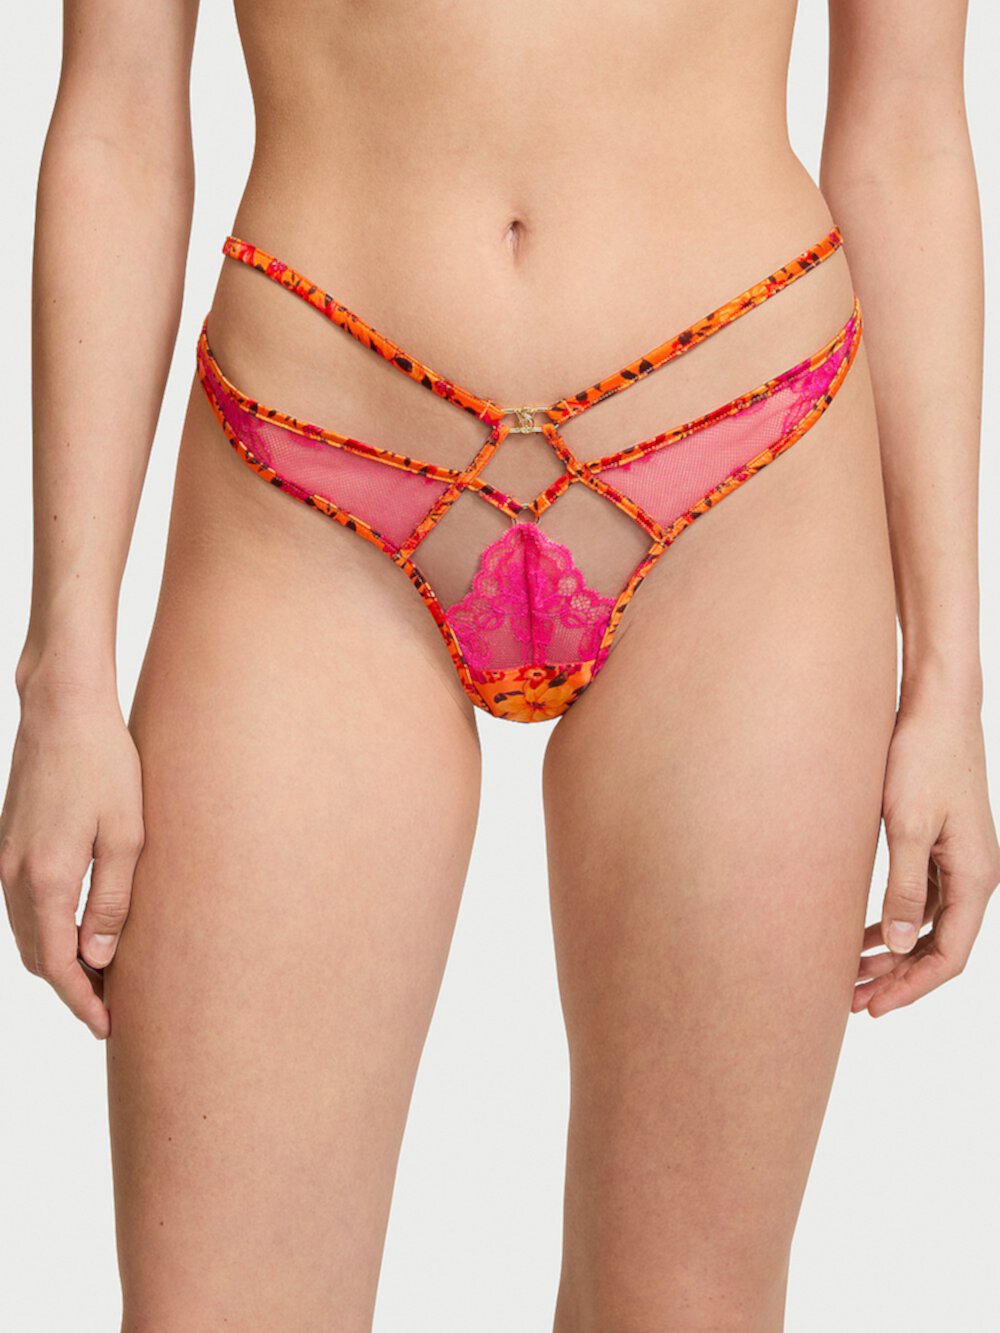 Tropical Satin Lace High-Leg Strappy Thong Panty Very Sexy